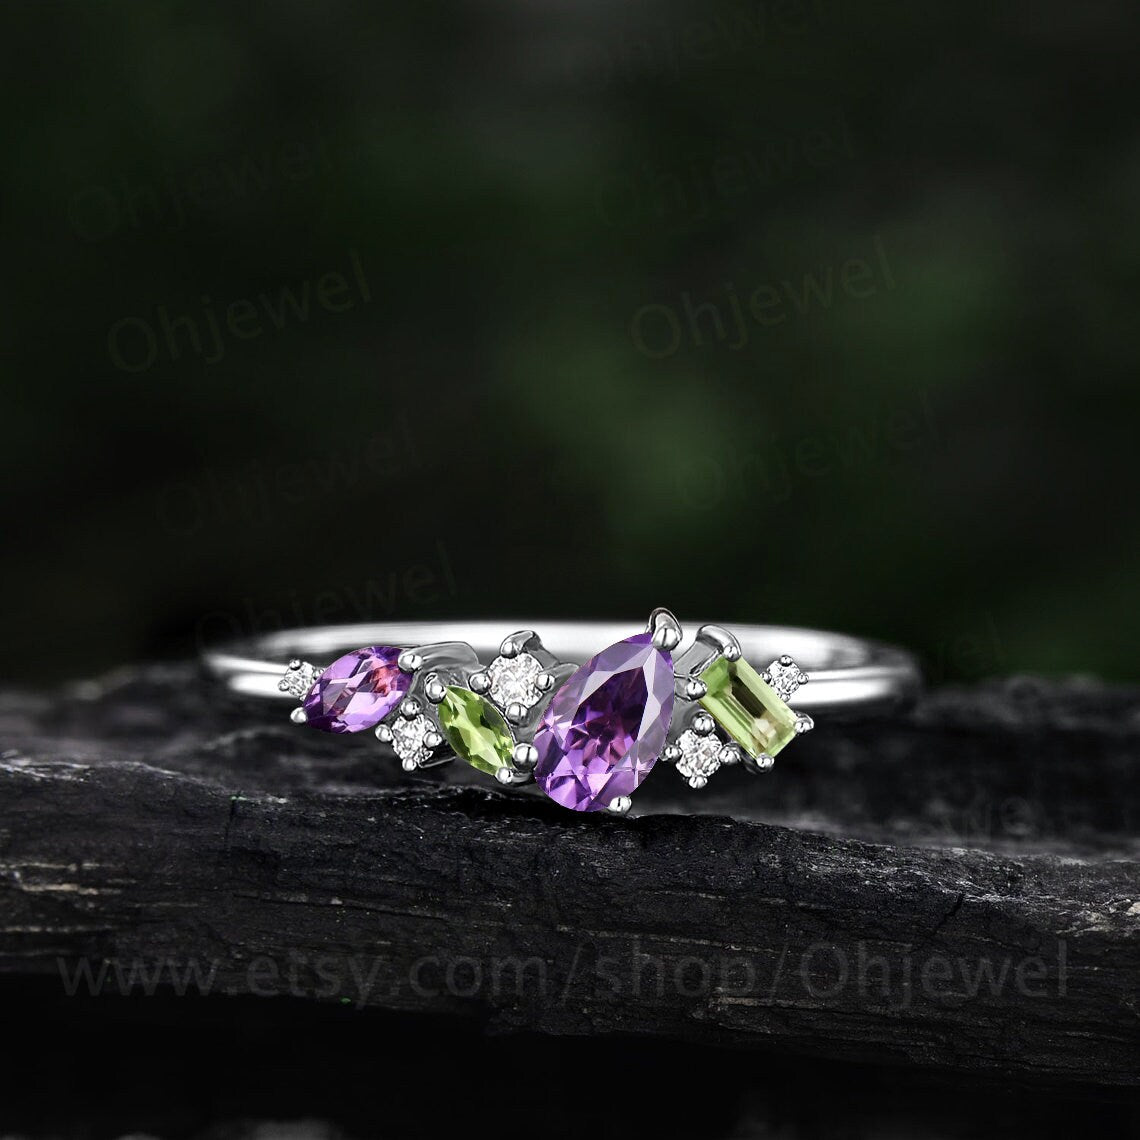 Dainty pear amethyst ring vintage art deco Baguette cut peridot ring 14k yellow gold unique cluster moissanite wedding band anniversary gift